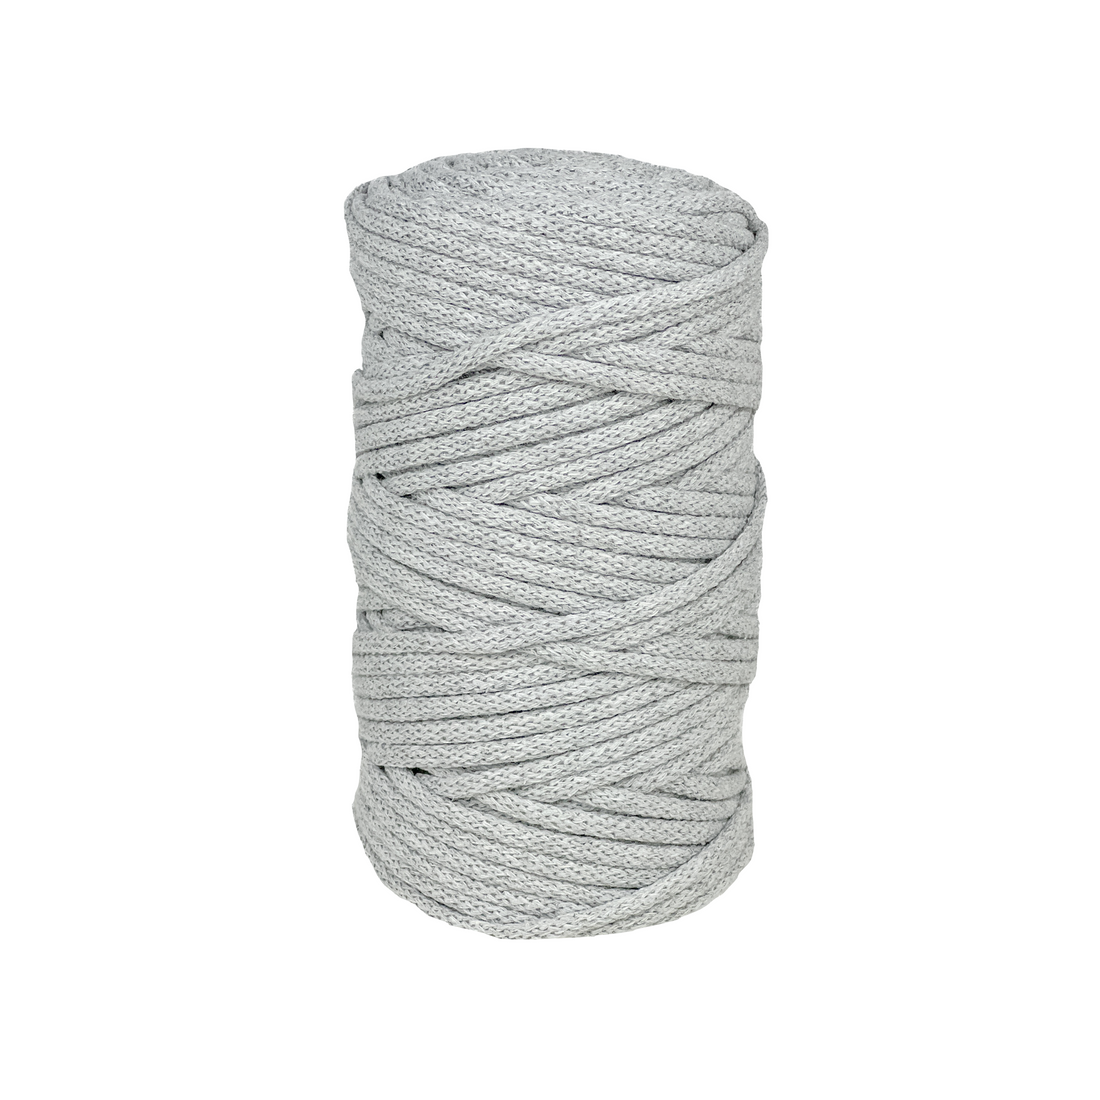 5mm Premium Braided Cotton Cord with core, 109 Yards, Macrame and  Crocheting, Soft Cotton Air Rope, Craft String 